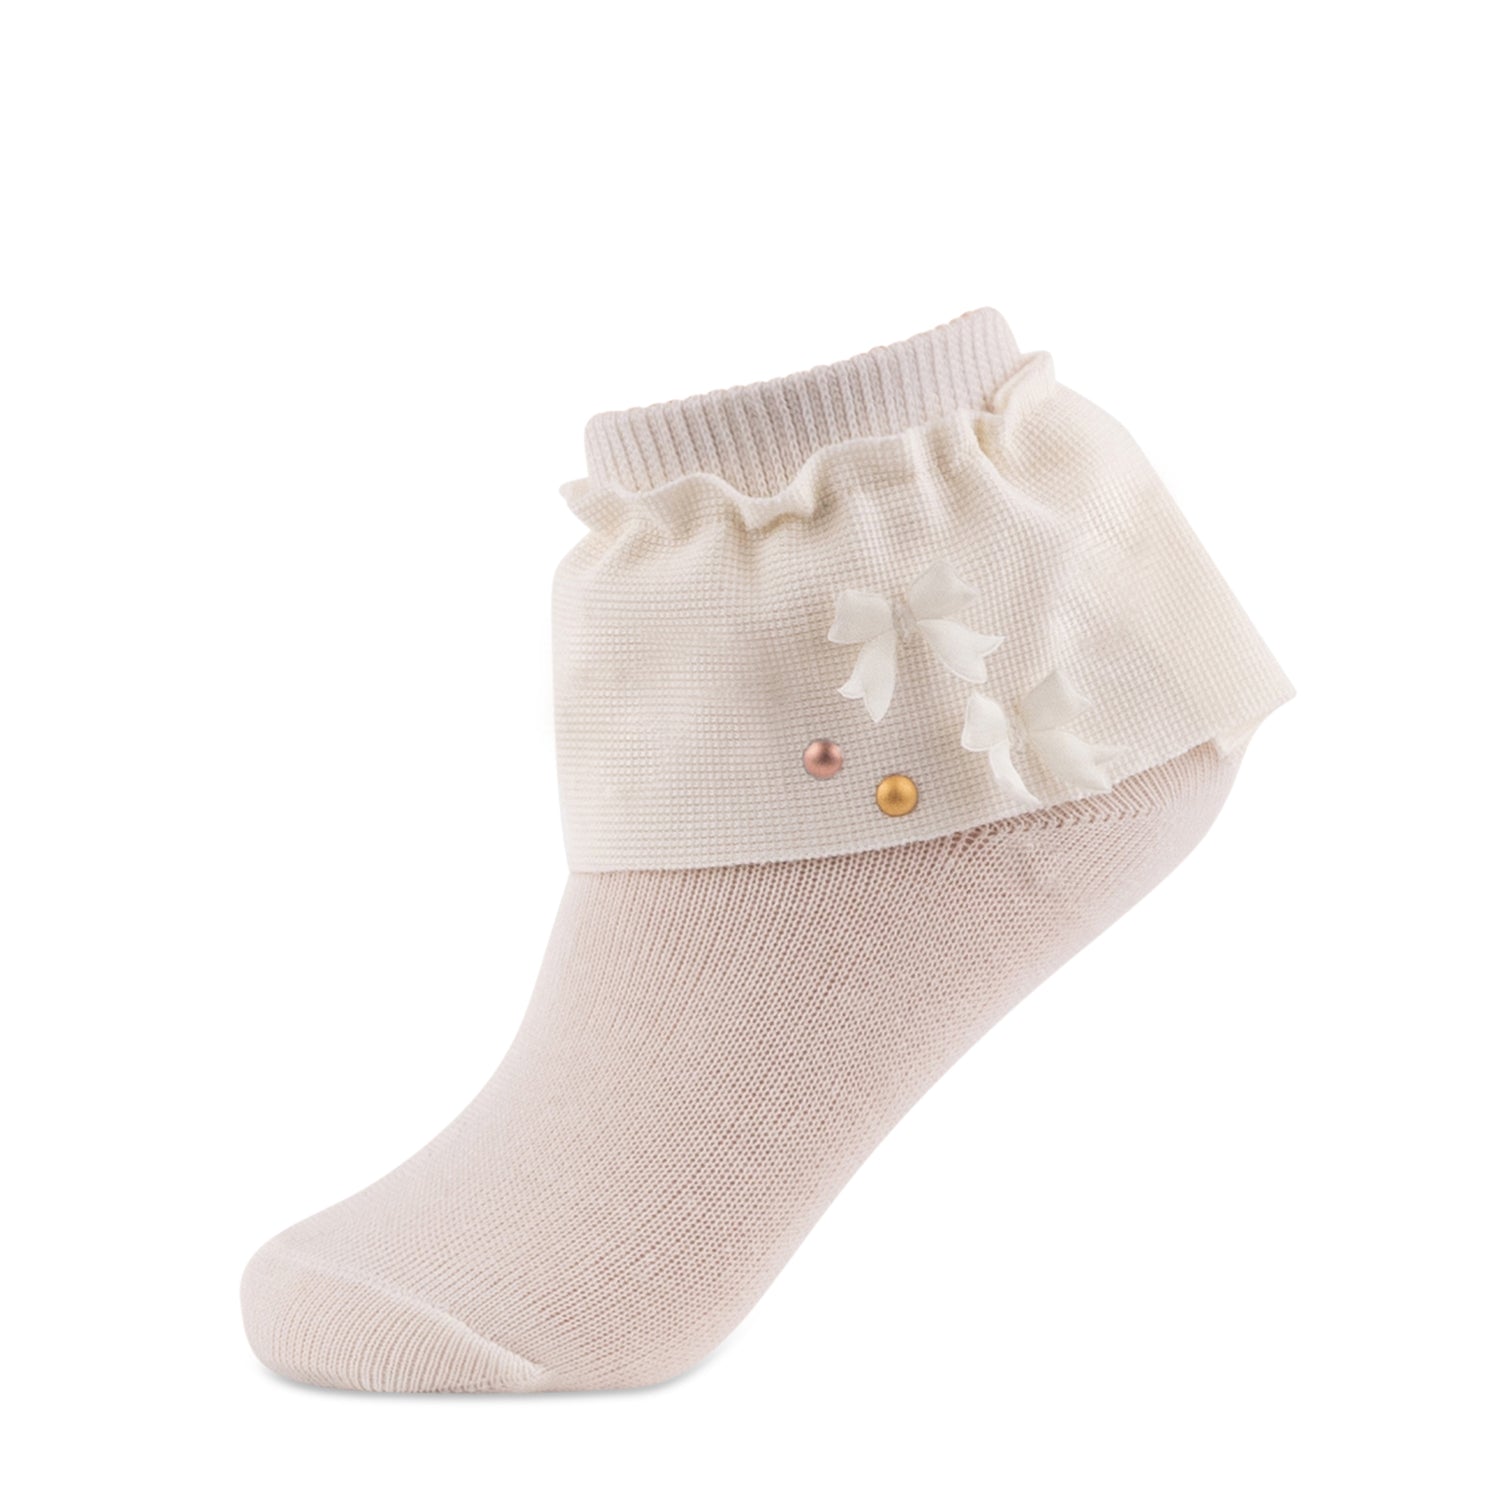 jrp socks ivory dreamy lace anklet sock with bows